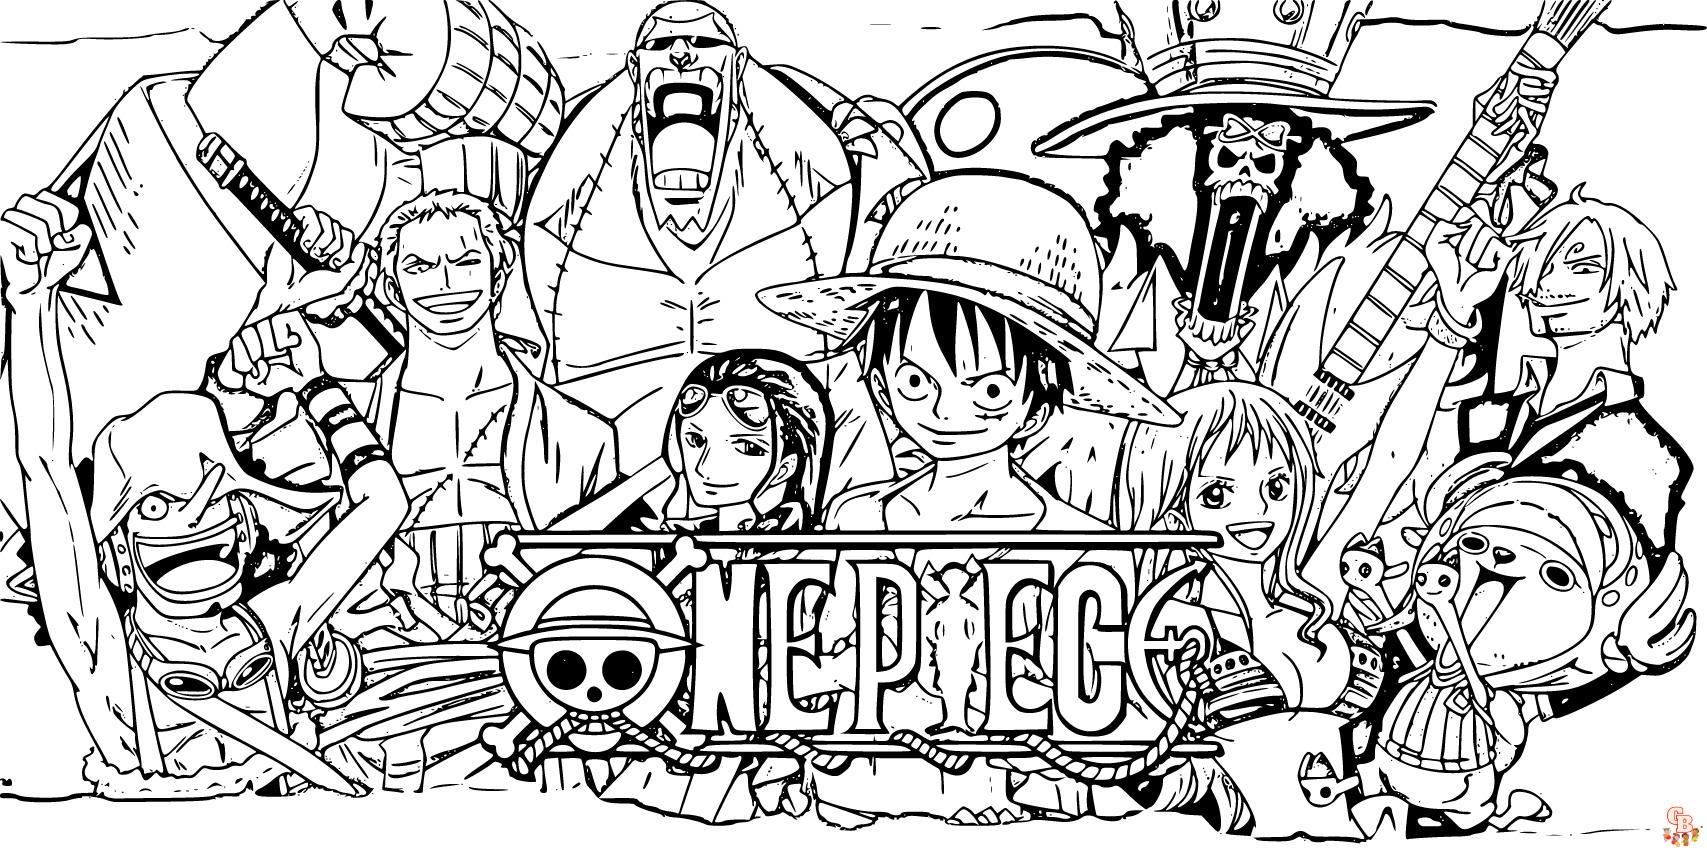 Explore the world of one piece with free printable coloring pages